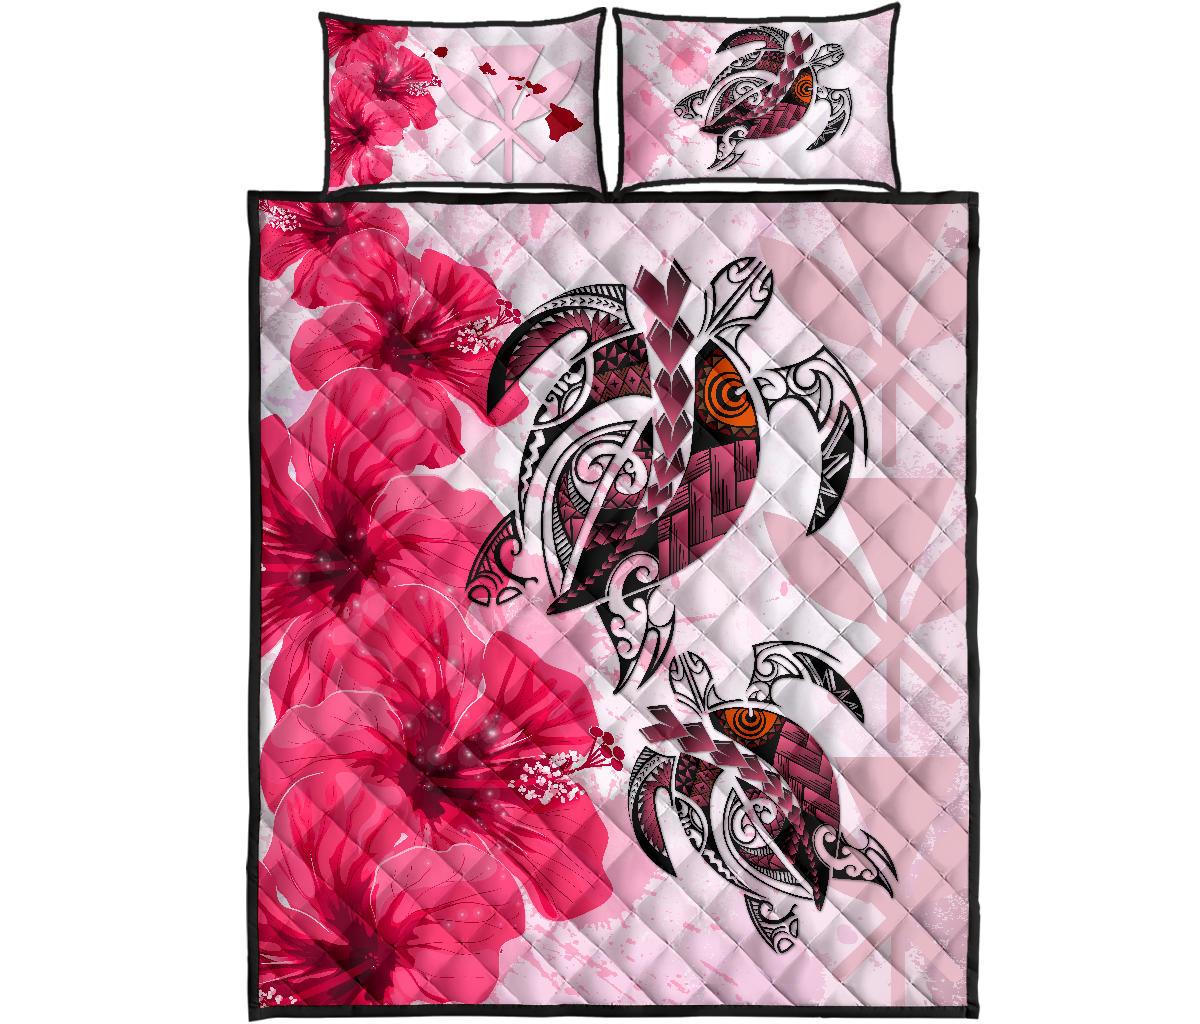 Hawaii Quilt Bed Set - Polynesia Turtle Hibiscus Pink Pink - Polynesian Pride